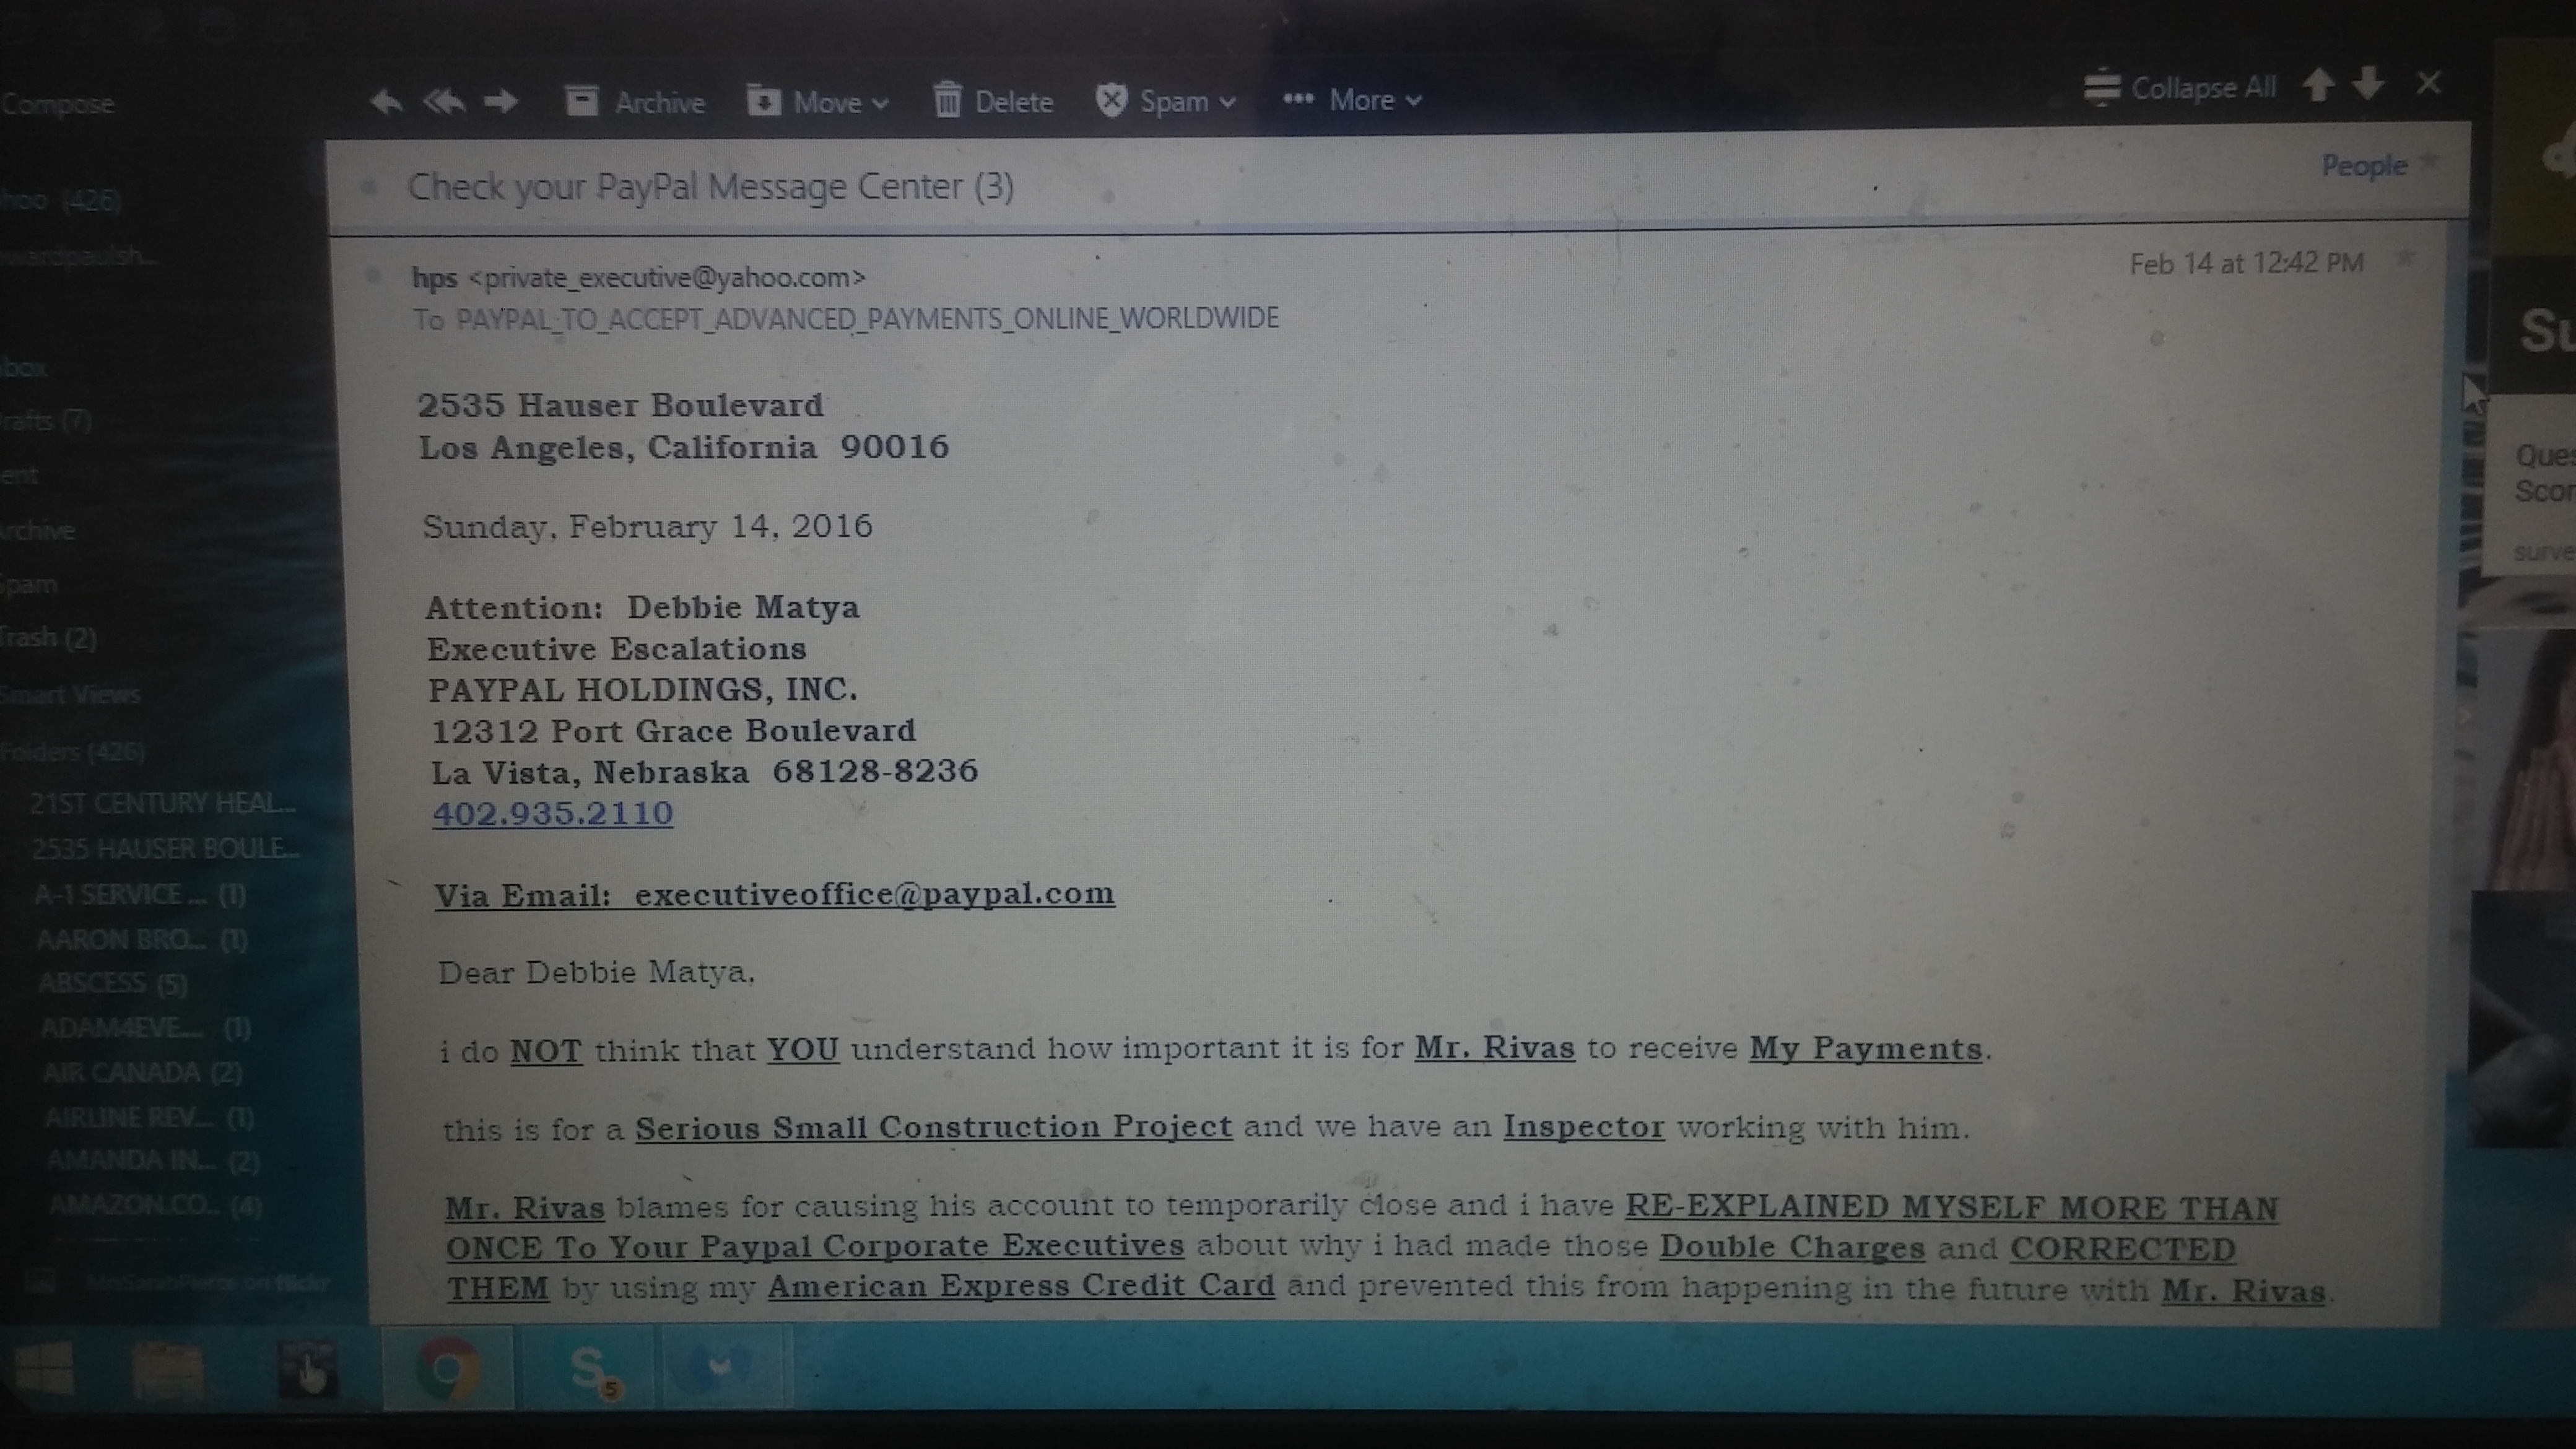 COMPLAINT LETTER TO DEBBIE MATYA, EXECUTIVE ESCALATIONS, PAYPAL, INC.